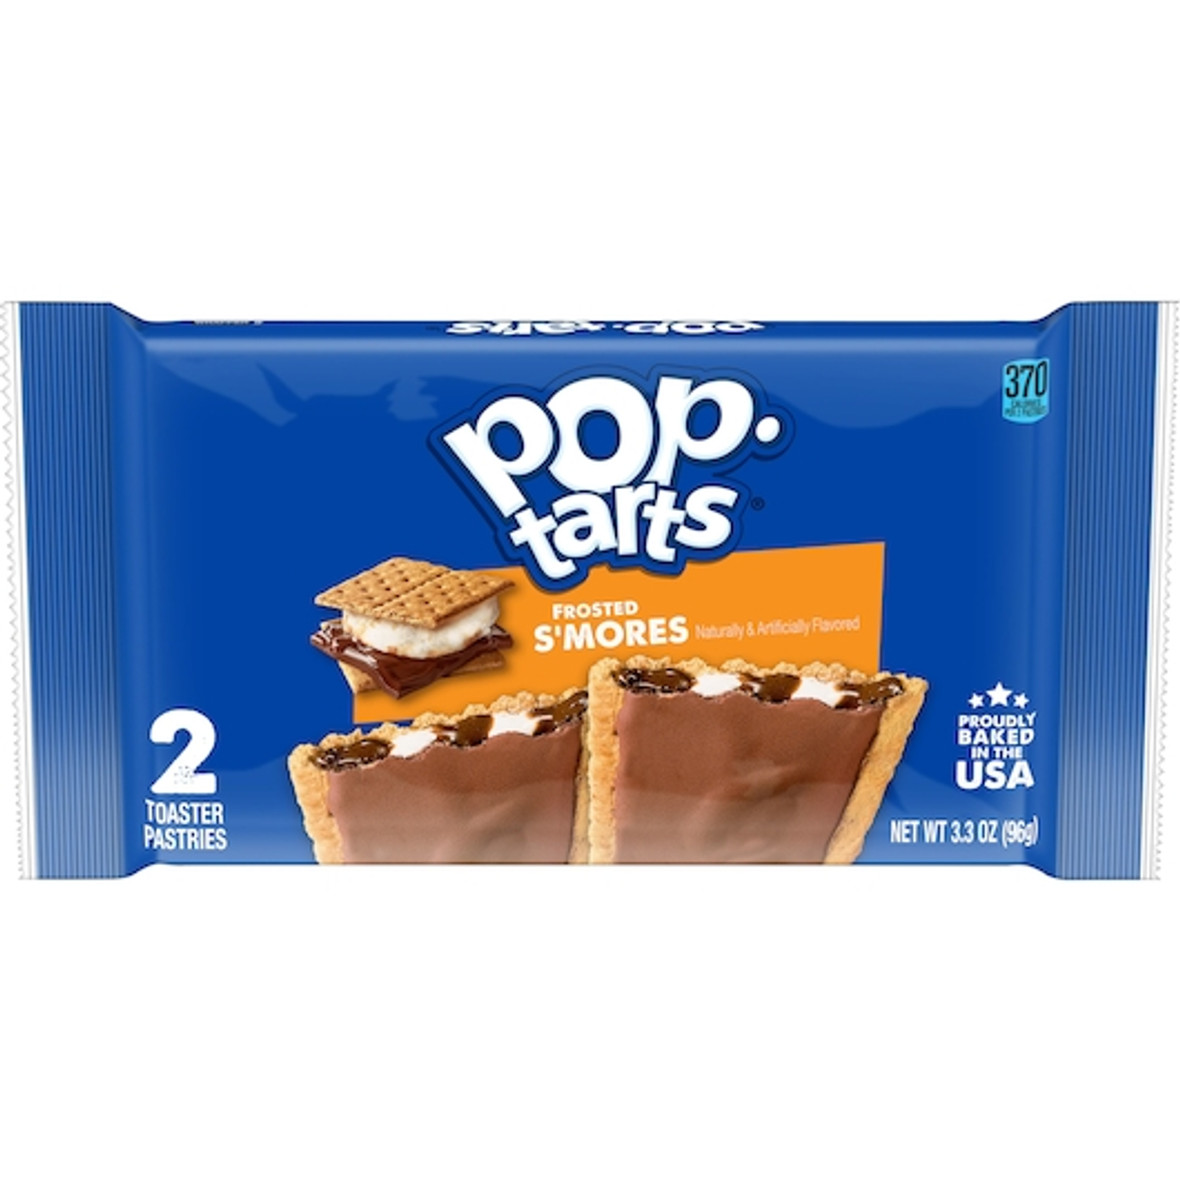 Kellogg Pop-Tarts Frosted Open & Fold Display S mores Pastry, 3.3 Ounces, 6 Per Box, 12 Per Case